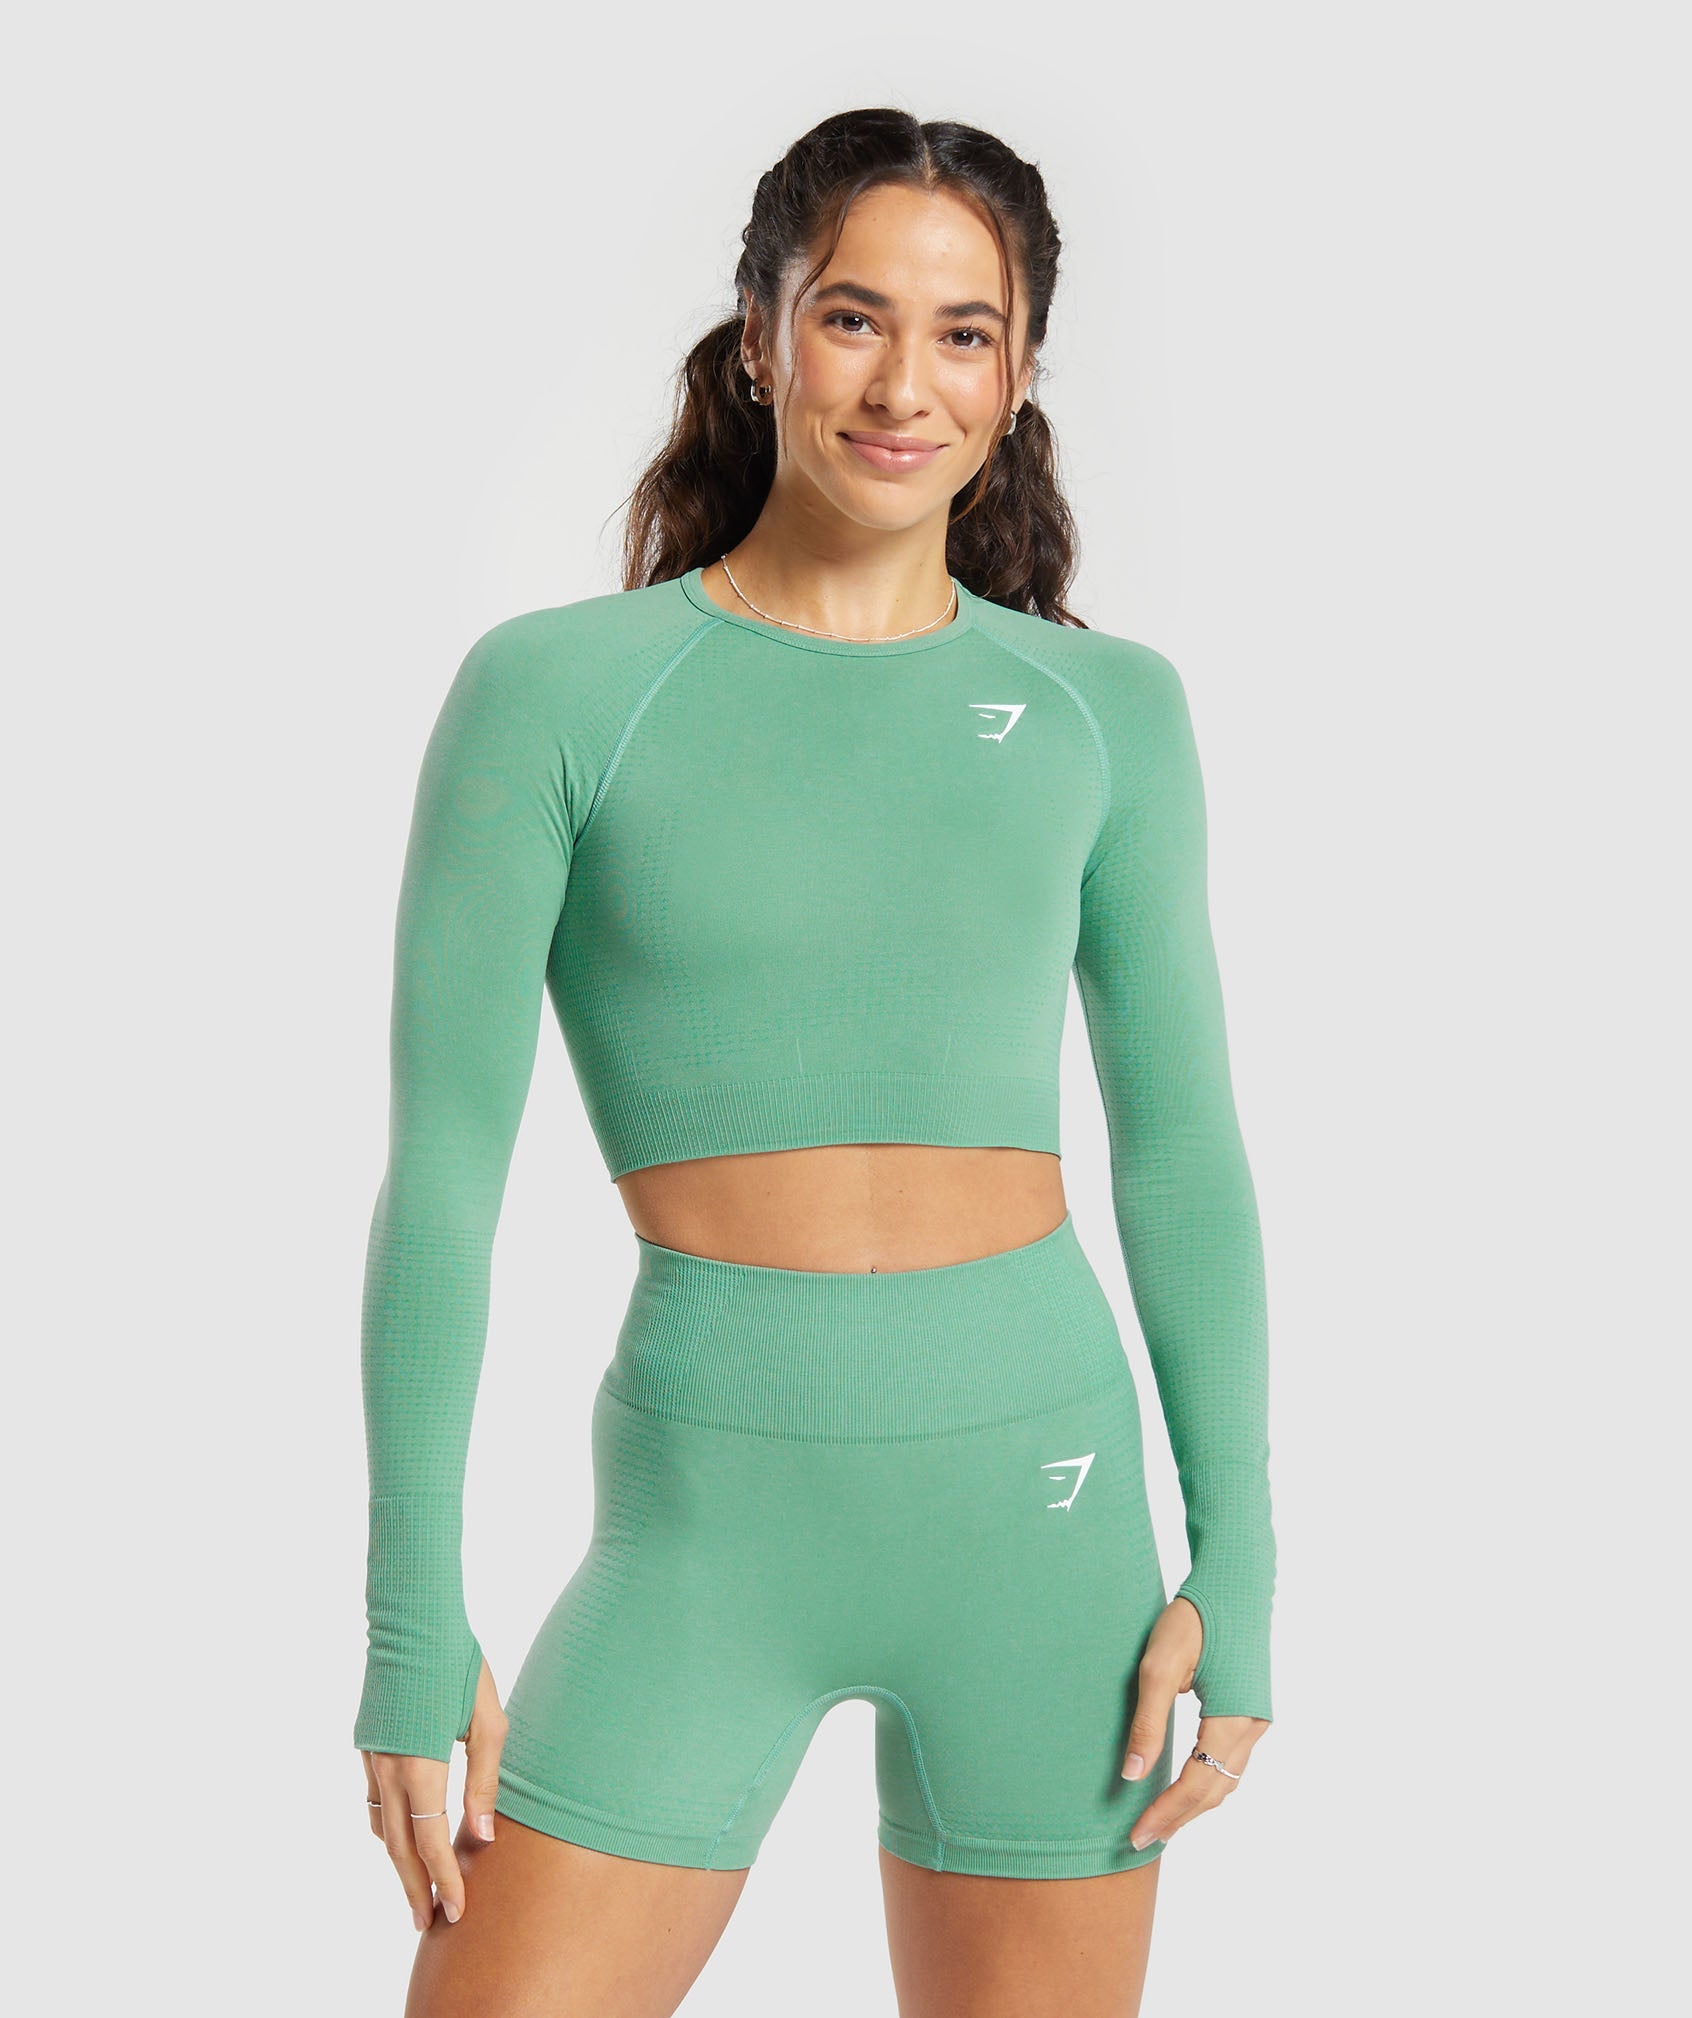 Vital Seamless 2.0 Crop Top in {{variantColor} is out of stock